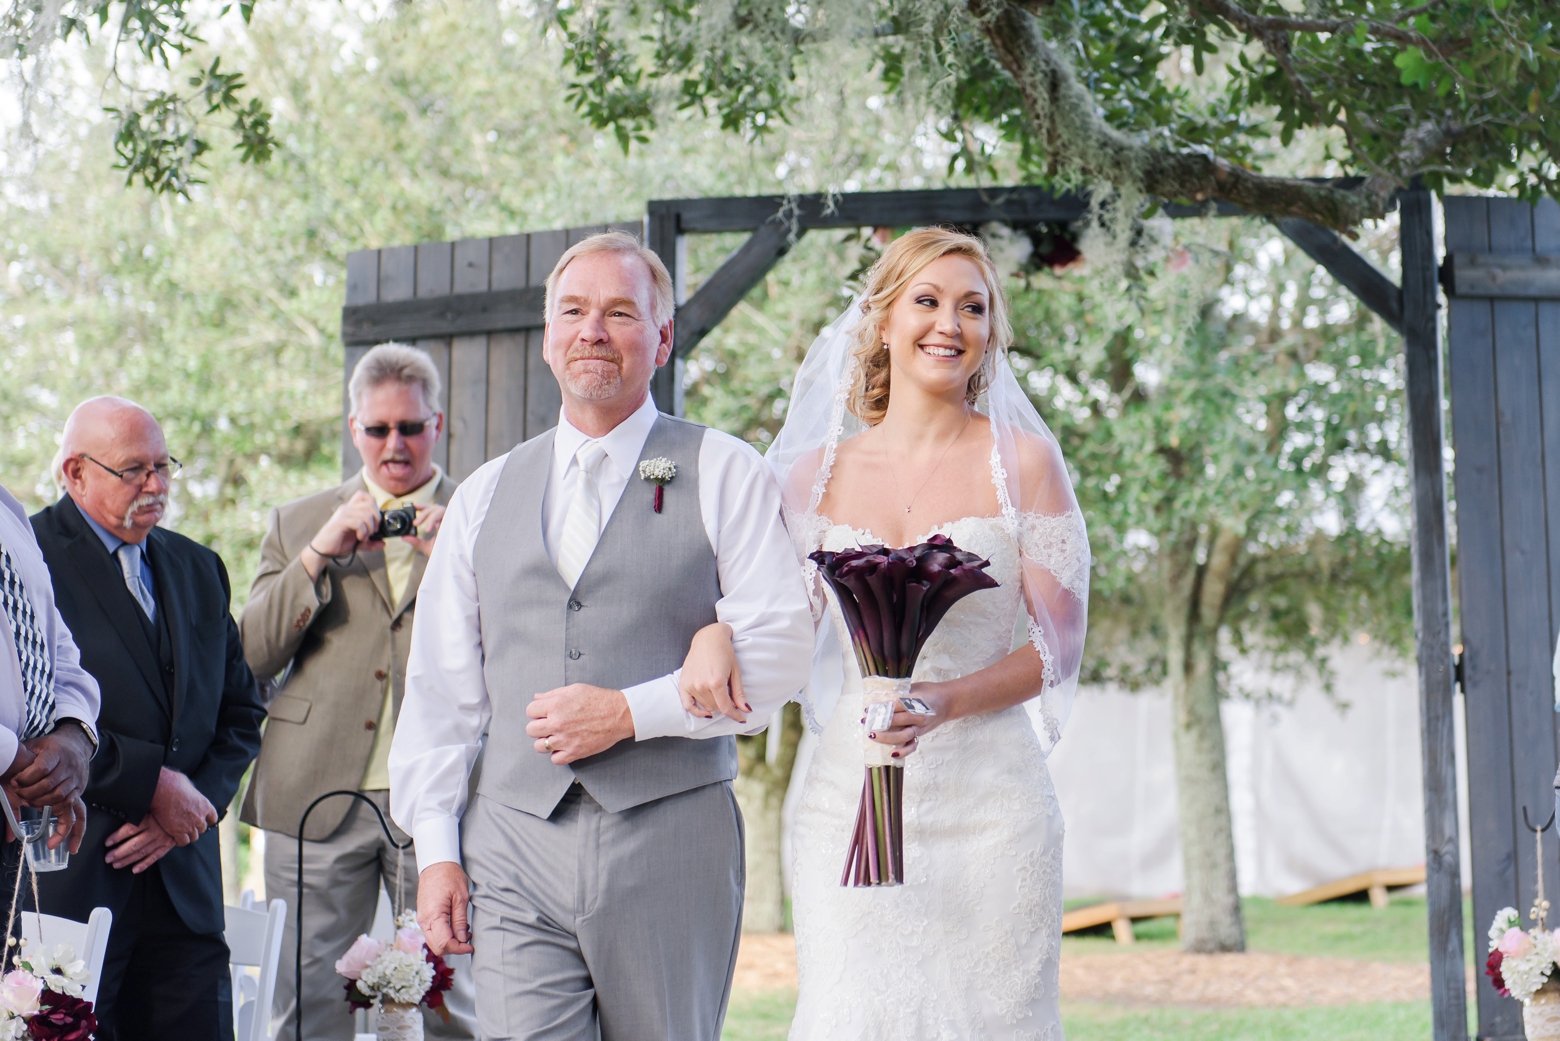 The Bride and her Dad walking the Aisle during Her Cross Creek Ranch wedding day